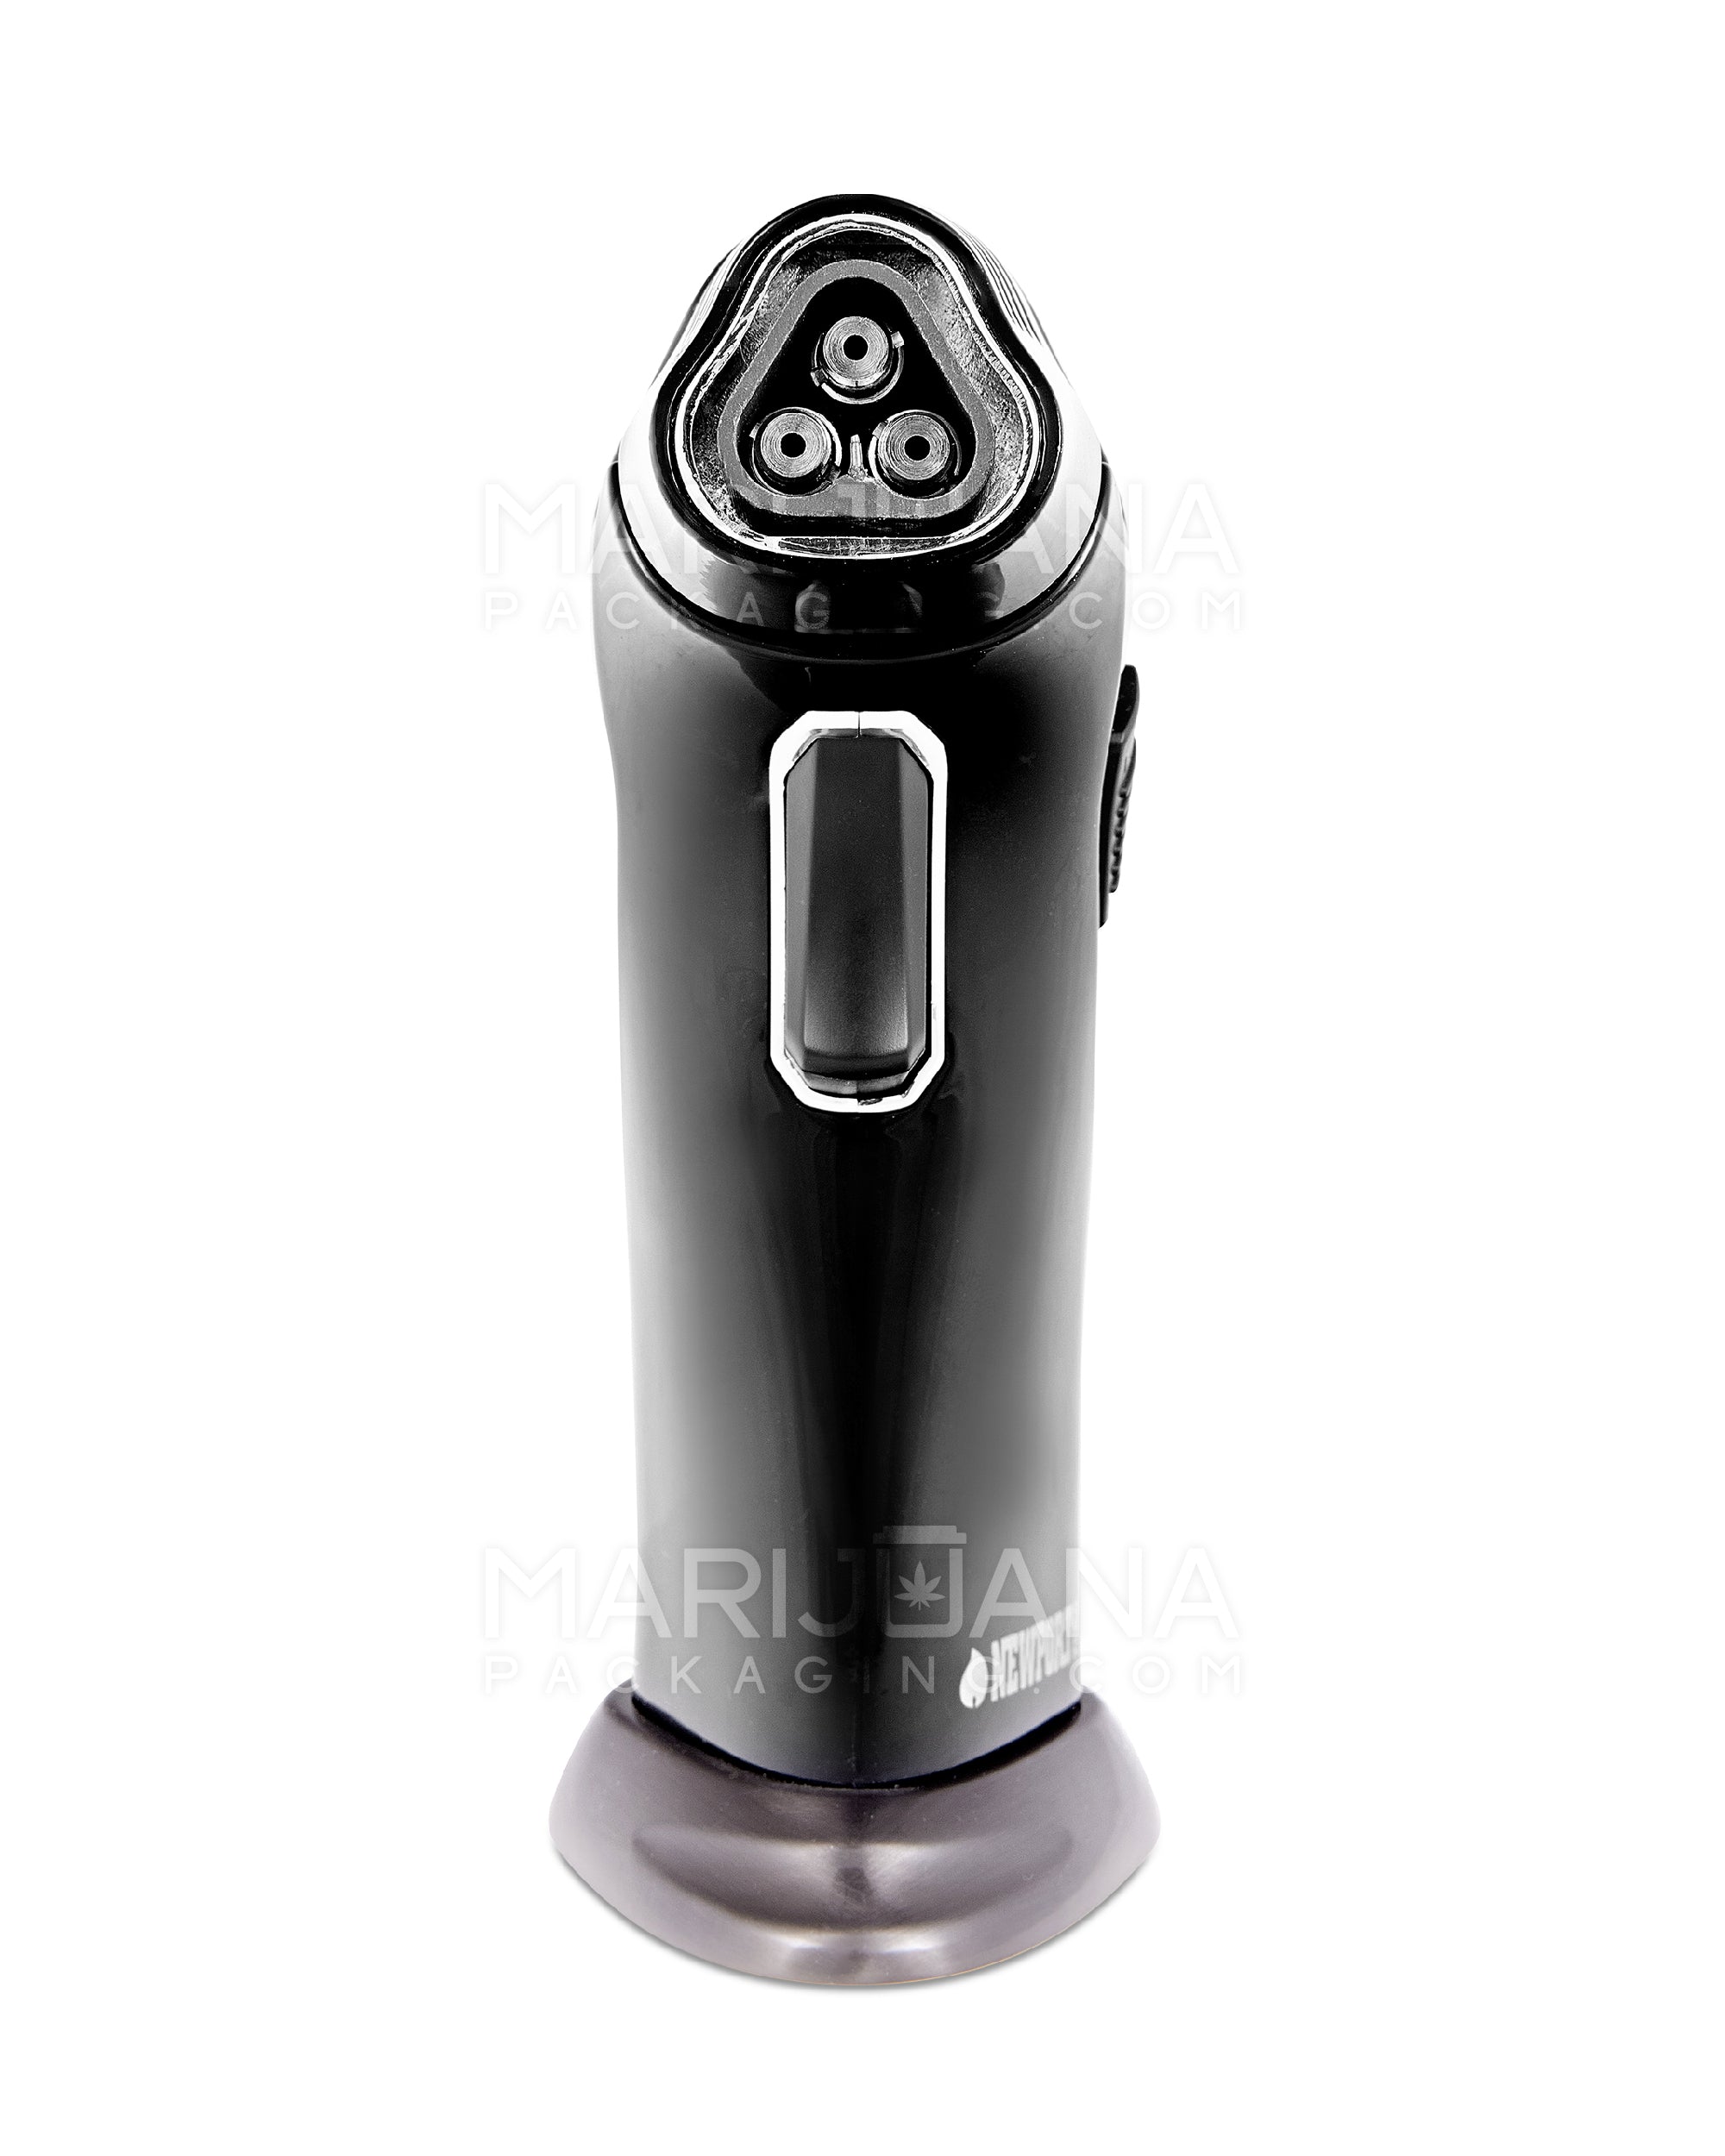 NEWPORT | Triple Flame Torch w/ Adjustable Flame | 6in Tall - No Butane - Black & Silver